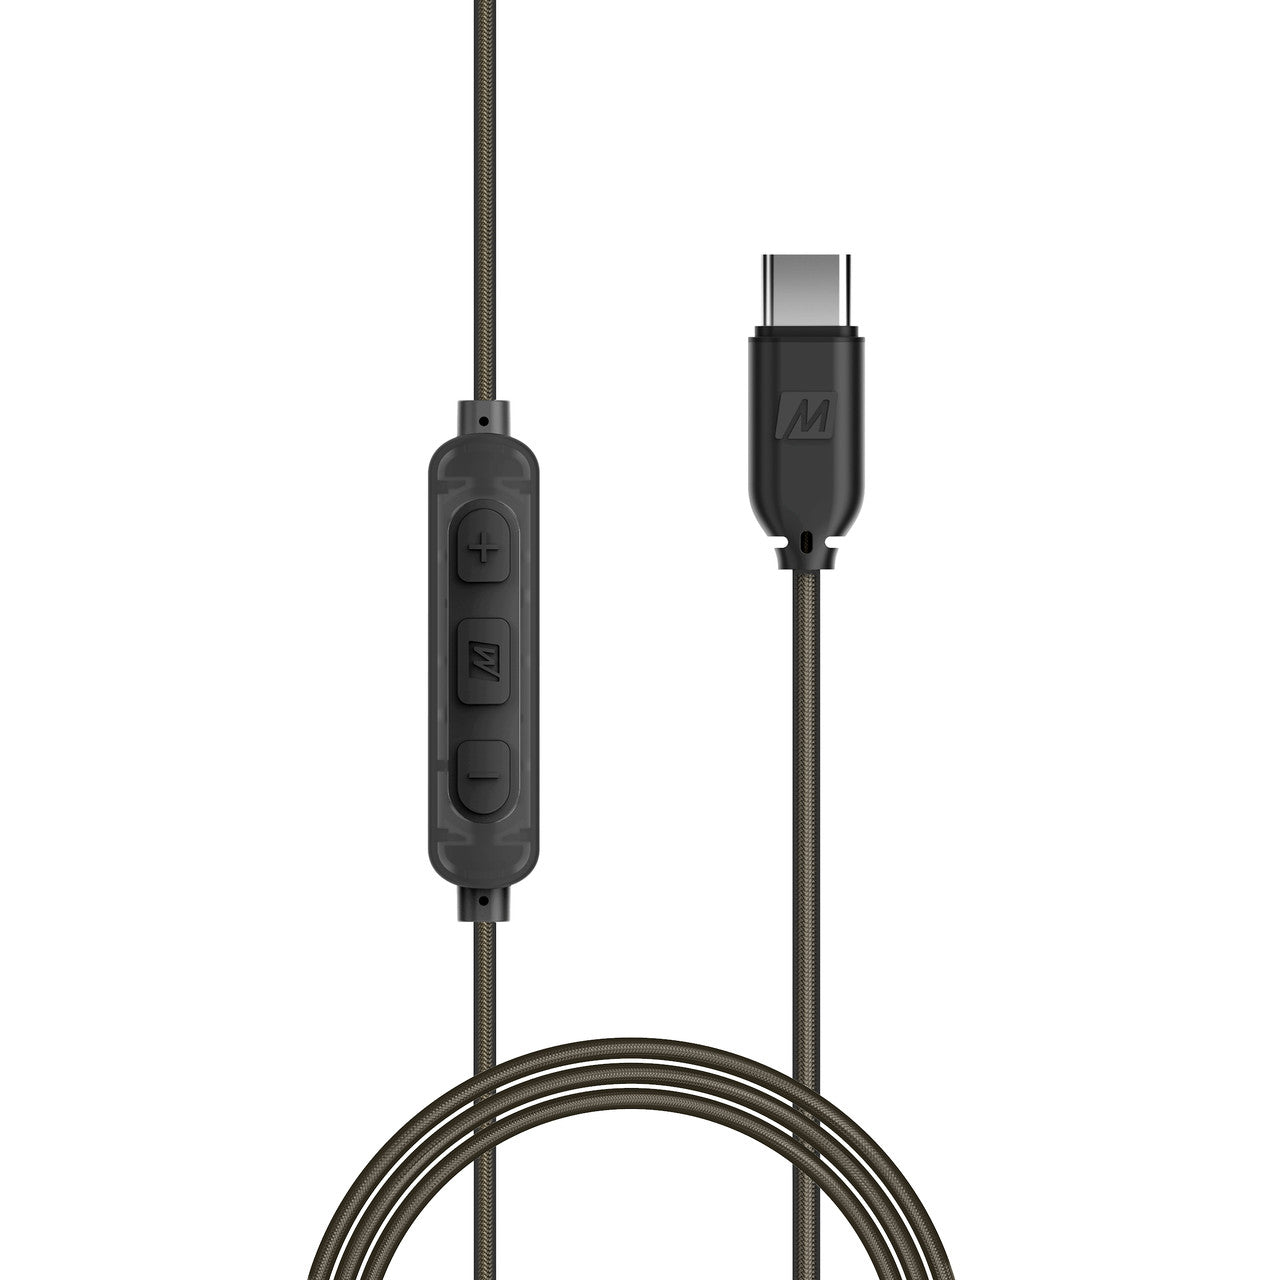 Image of M6 In-Ear Sports Headphones with Memory Wire and Headset (USB-C Plug).